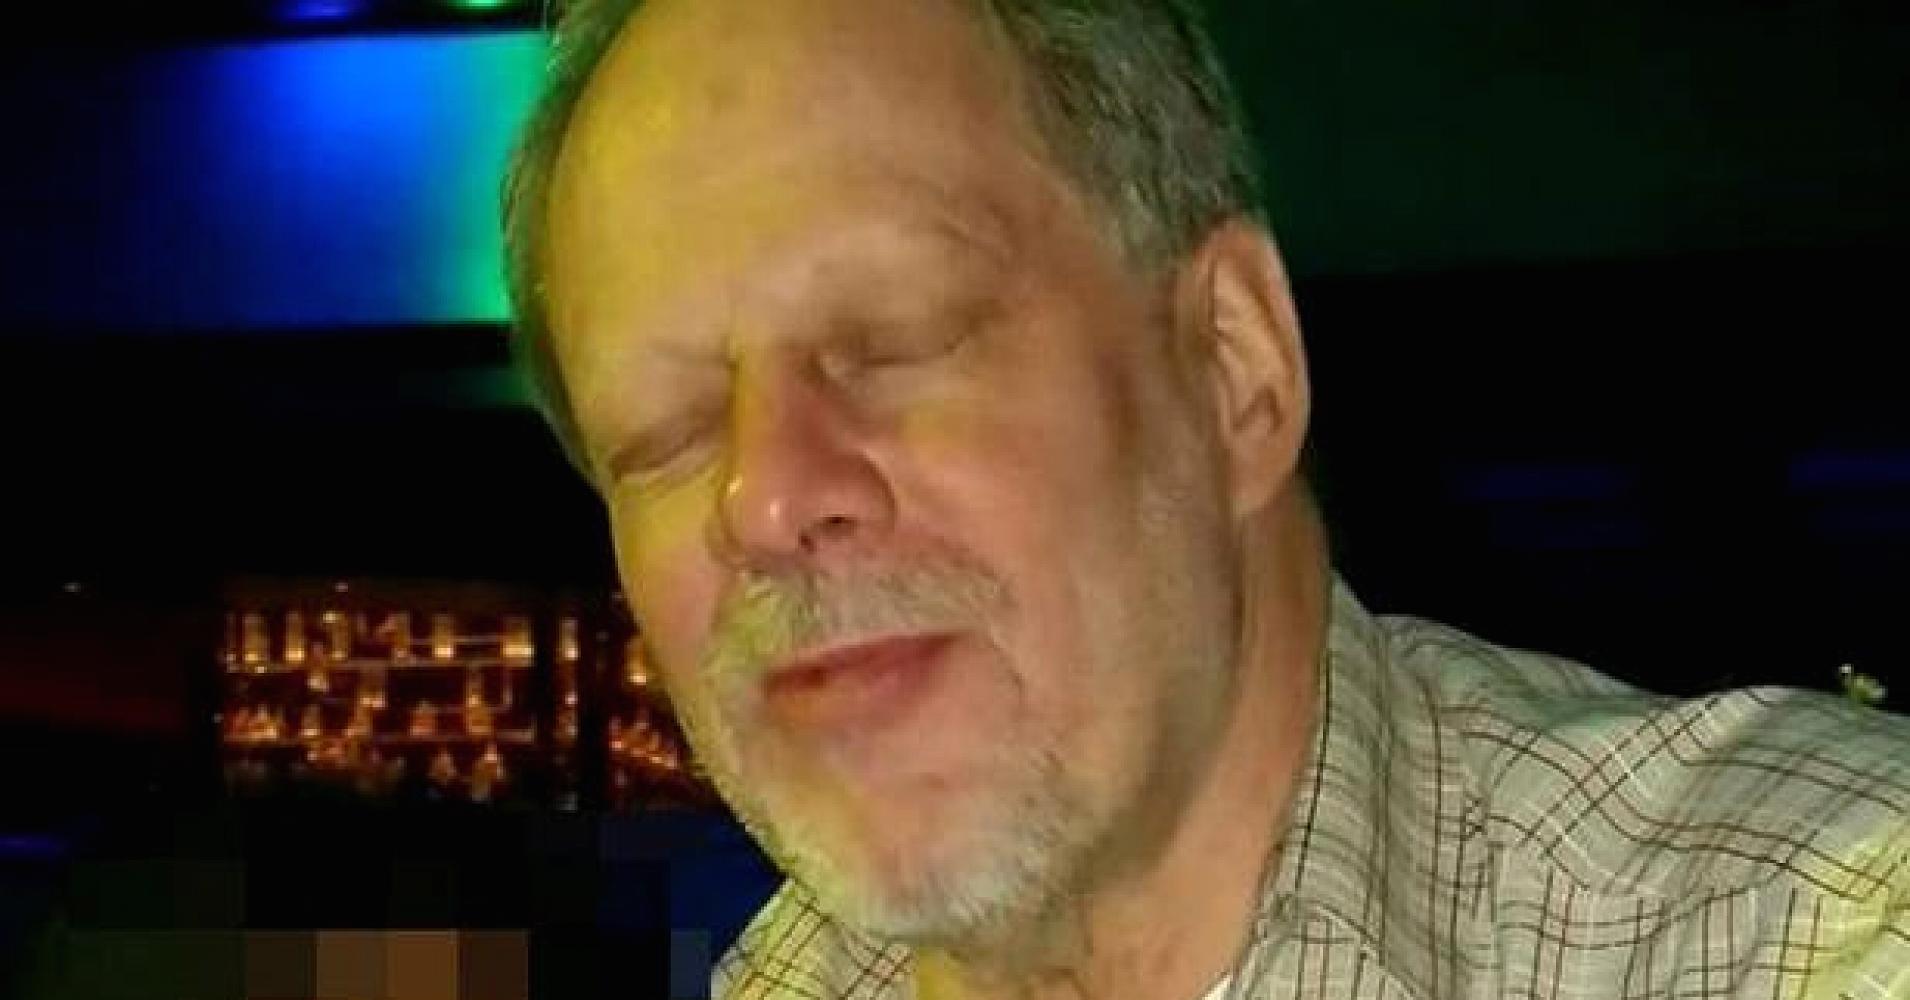 The suspected gunmen in the Las Vegas shooting has been identified as 64-year-old Stephen Paddock of Mesquite, Nevada.